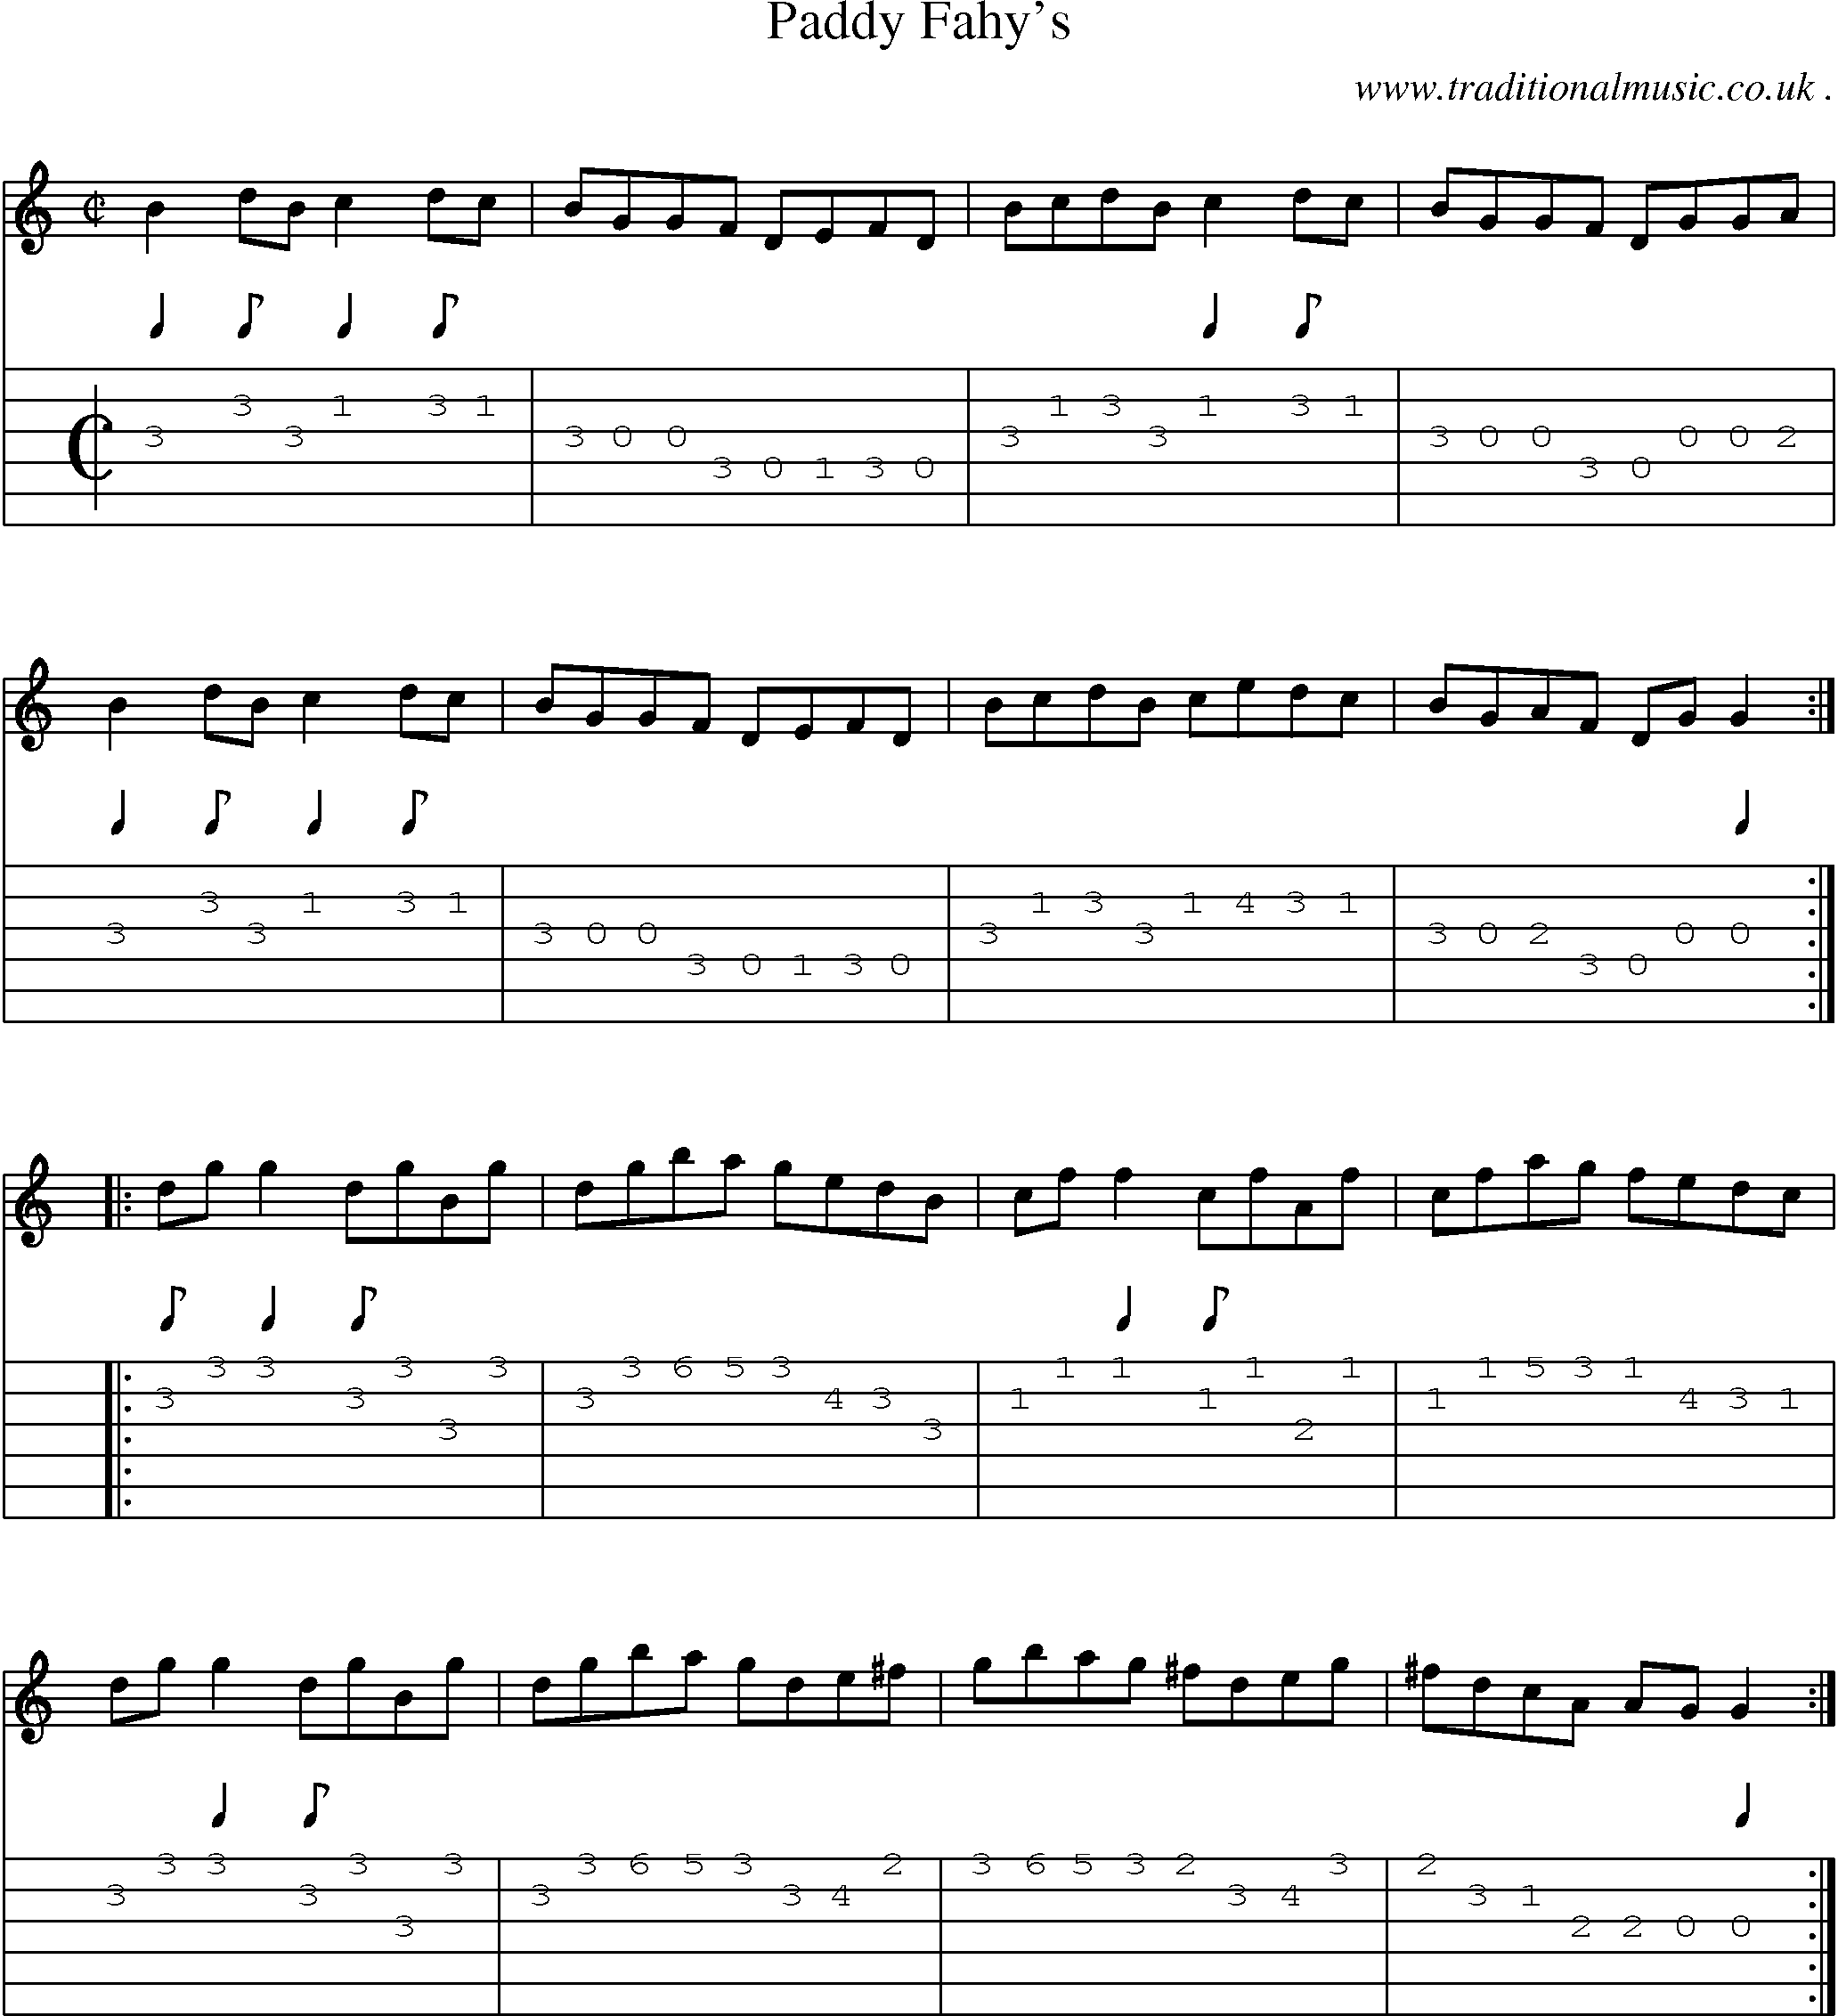 Sheet-Music and Guitar Tabs for Paddy Fahys